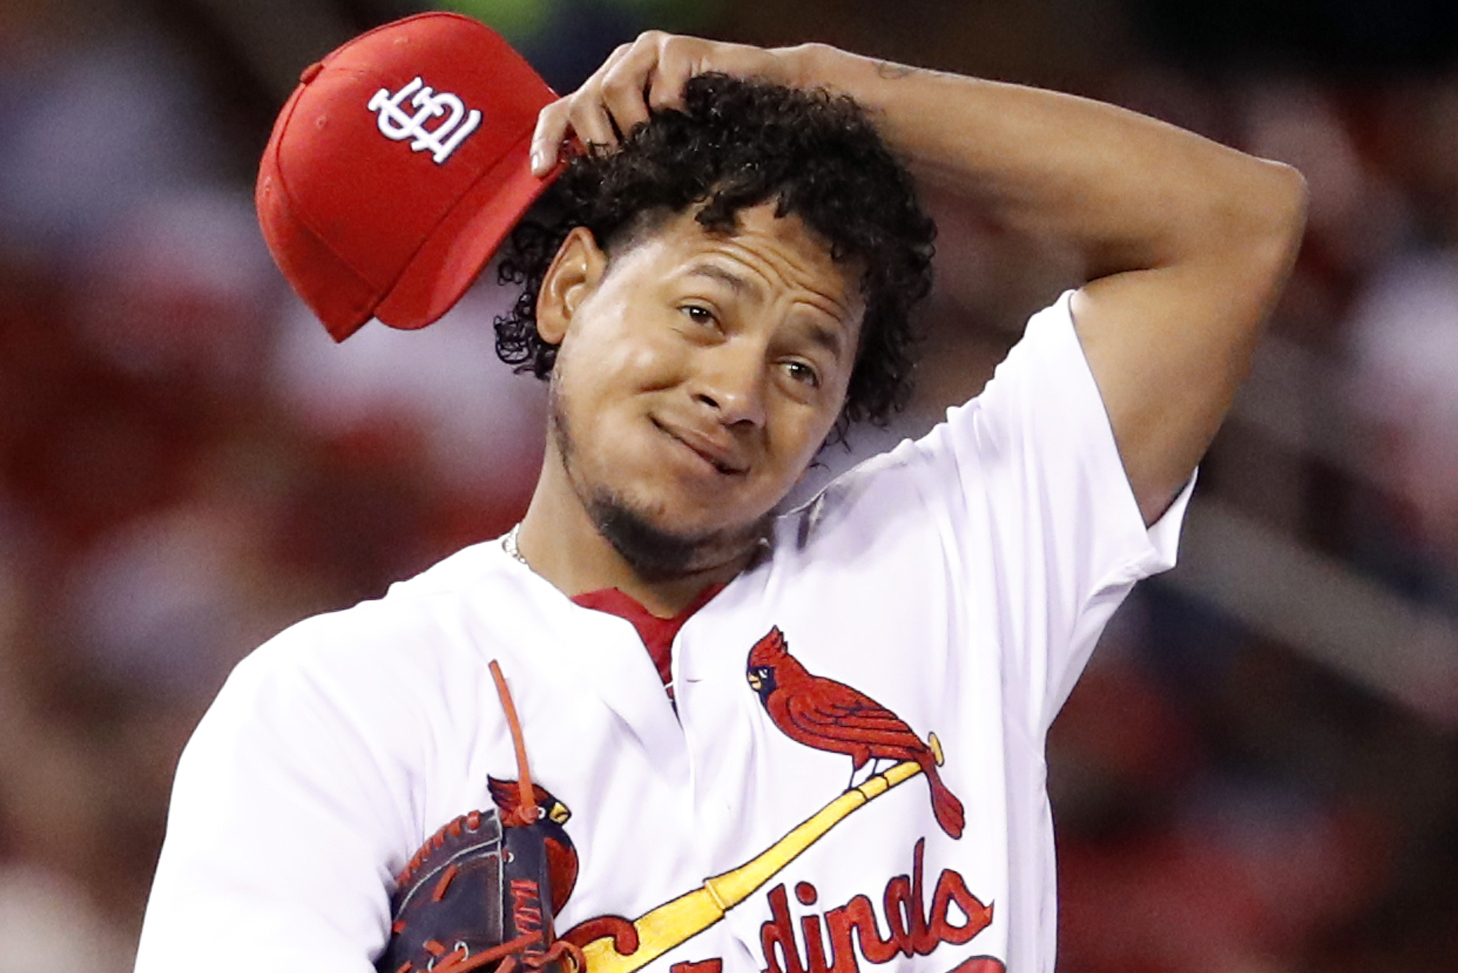 Yadier Molina  Pure Dancing with the Stars